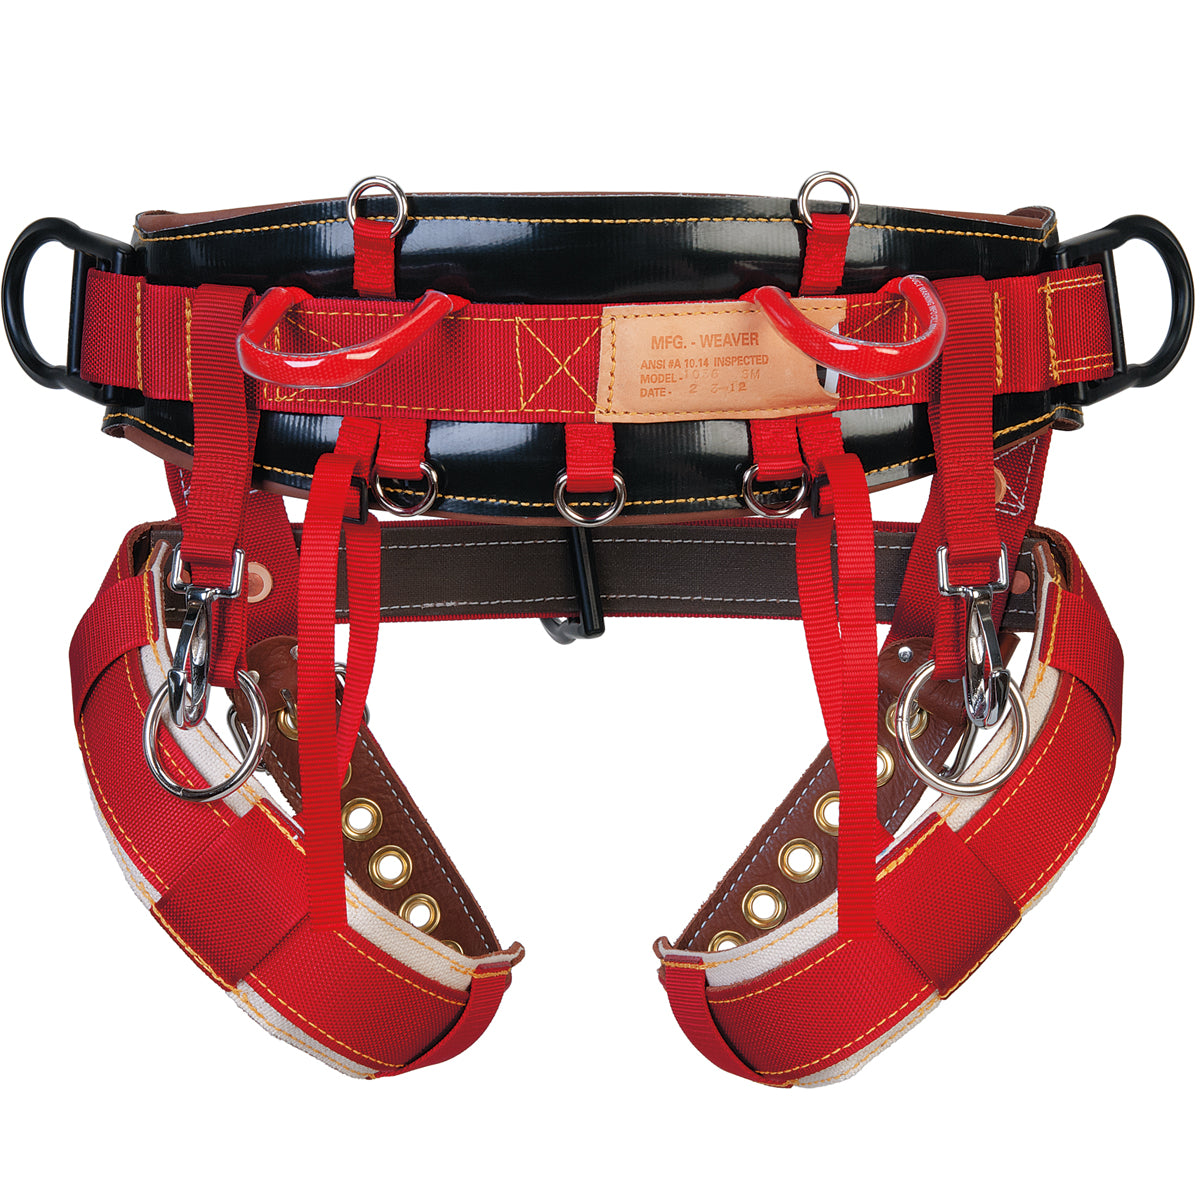 Weaver 08-01036-MD Floating Dee Extra Wide Back Saddle with Pad Leg Strap, Medium